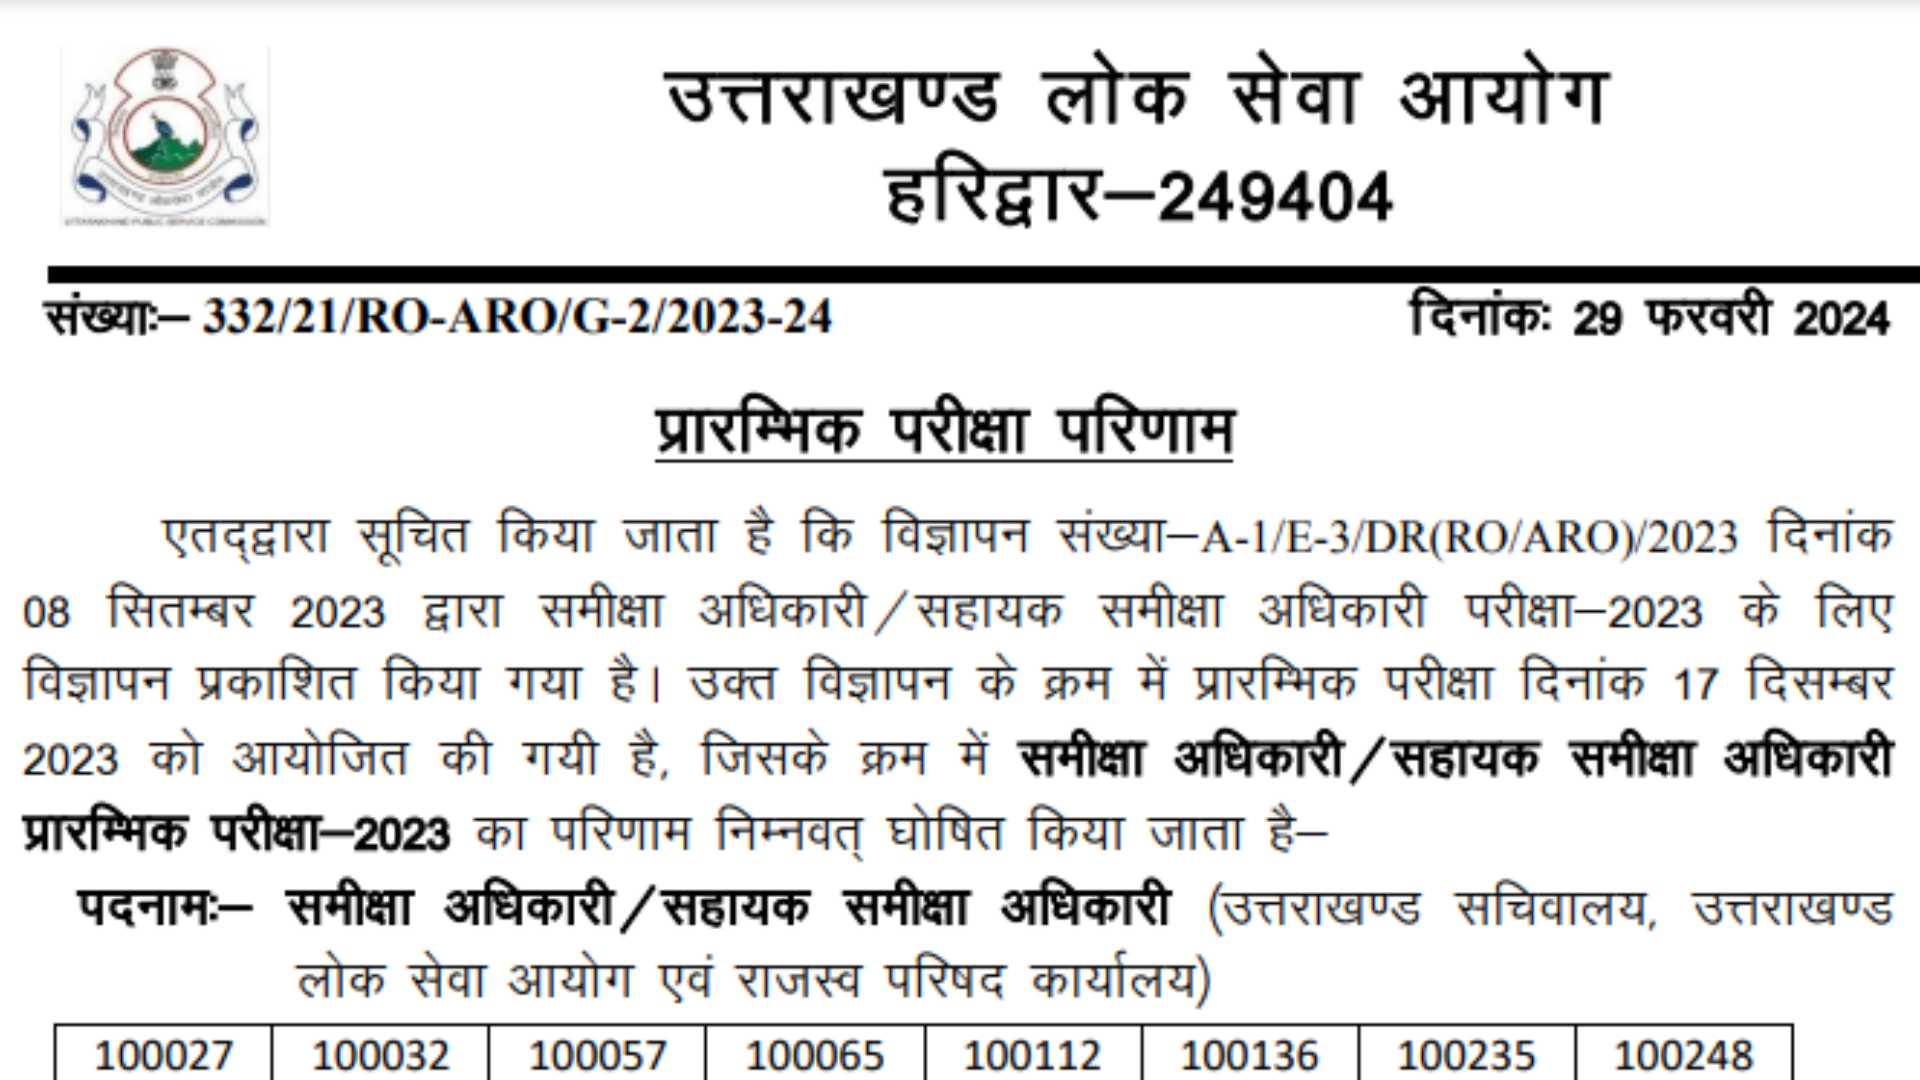 UKPSC Uttarakhand Review Officer RO and Assistant Review Officer ARO Examination 2023 Pre Result with Marks 2024 for 137 Post